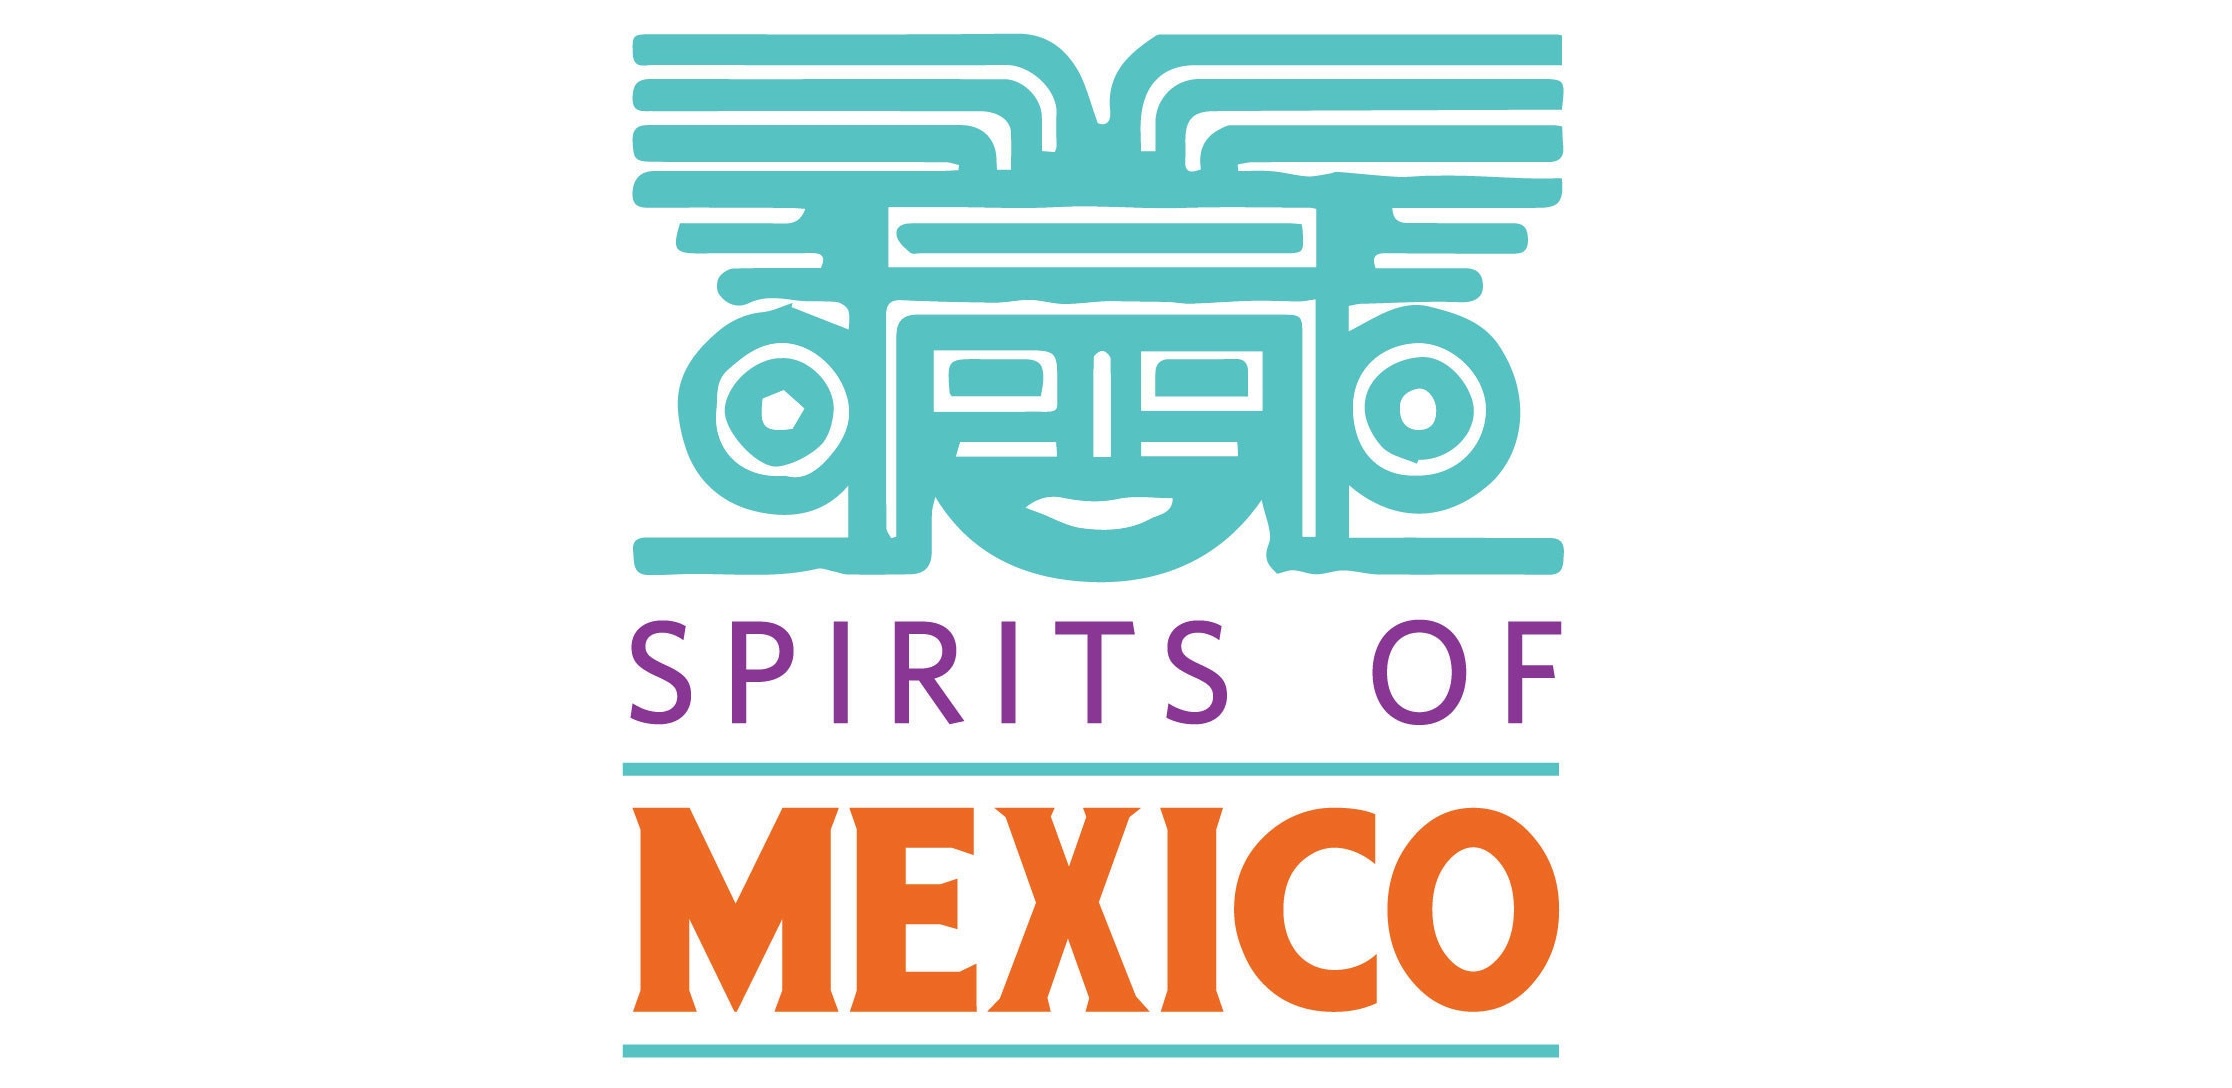 Registration for the Spirits of Mexico is Now Open